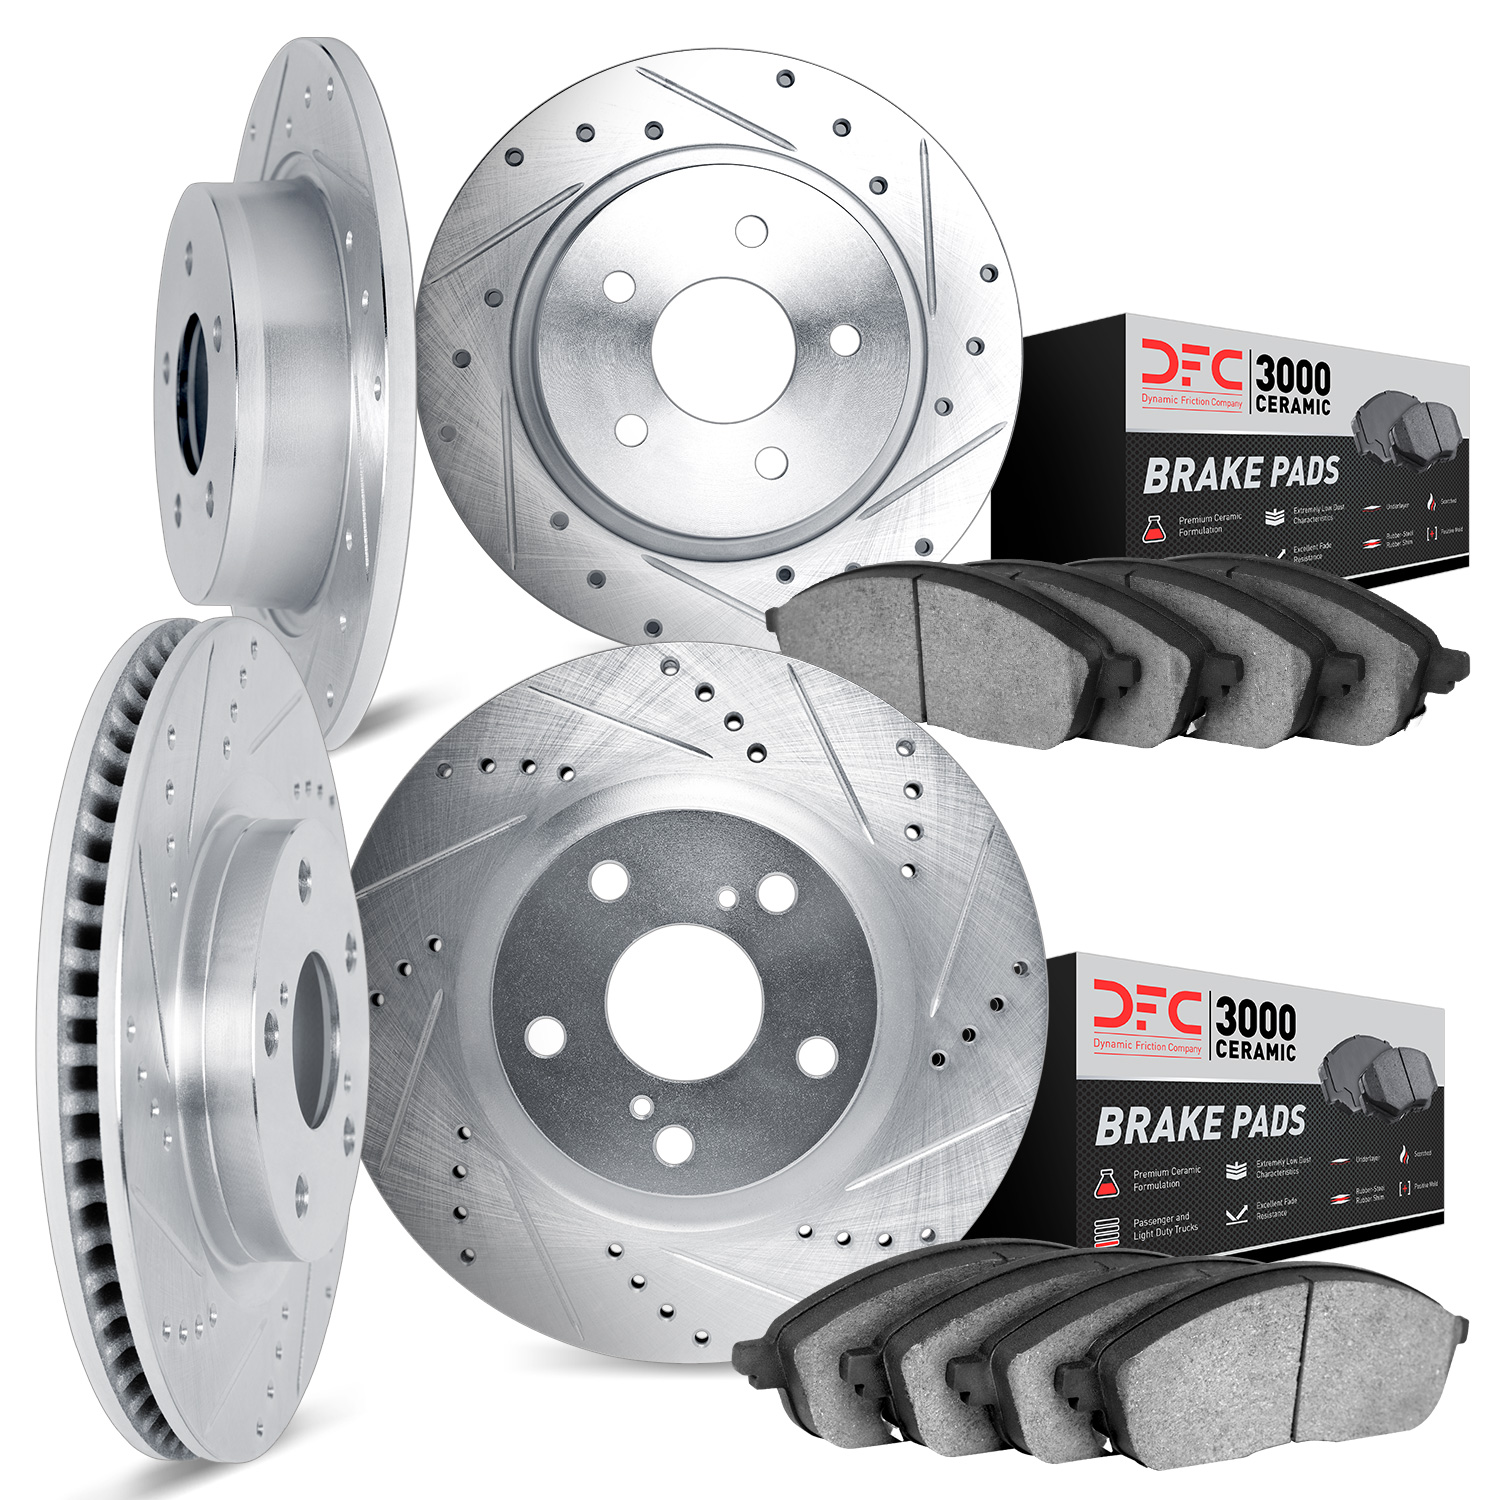 7304-80028 Drilled/Slotted Brake Rotor with 3000-Series Ceramic Brake Pads Kit [Silver], 2004-2013 Ford/Lincoln/Mercury/Mazda, P